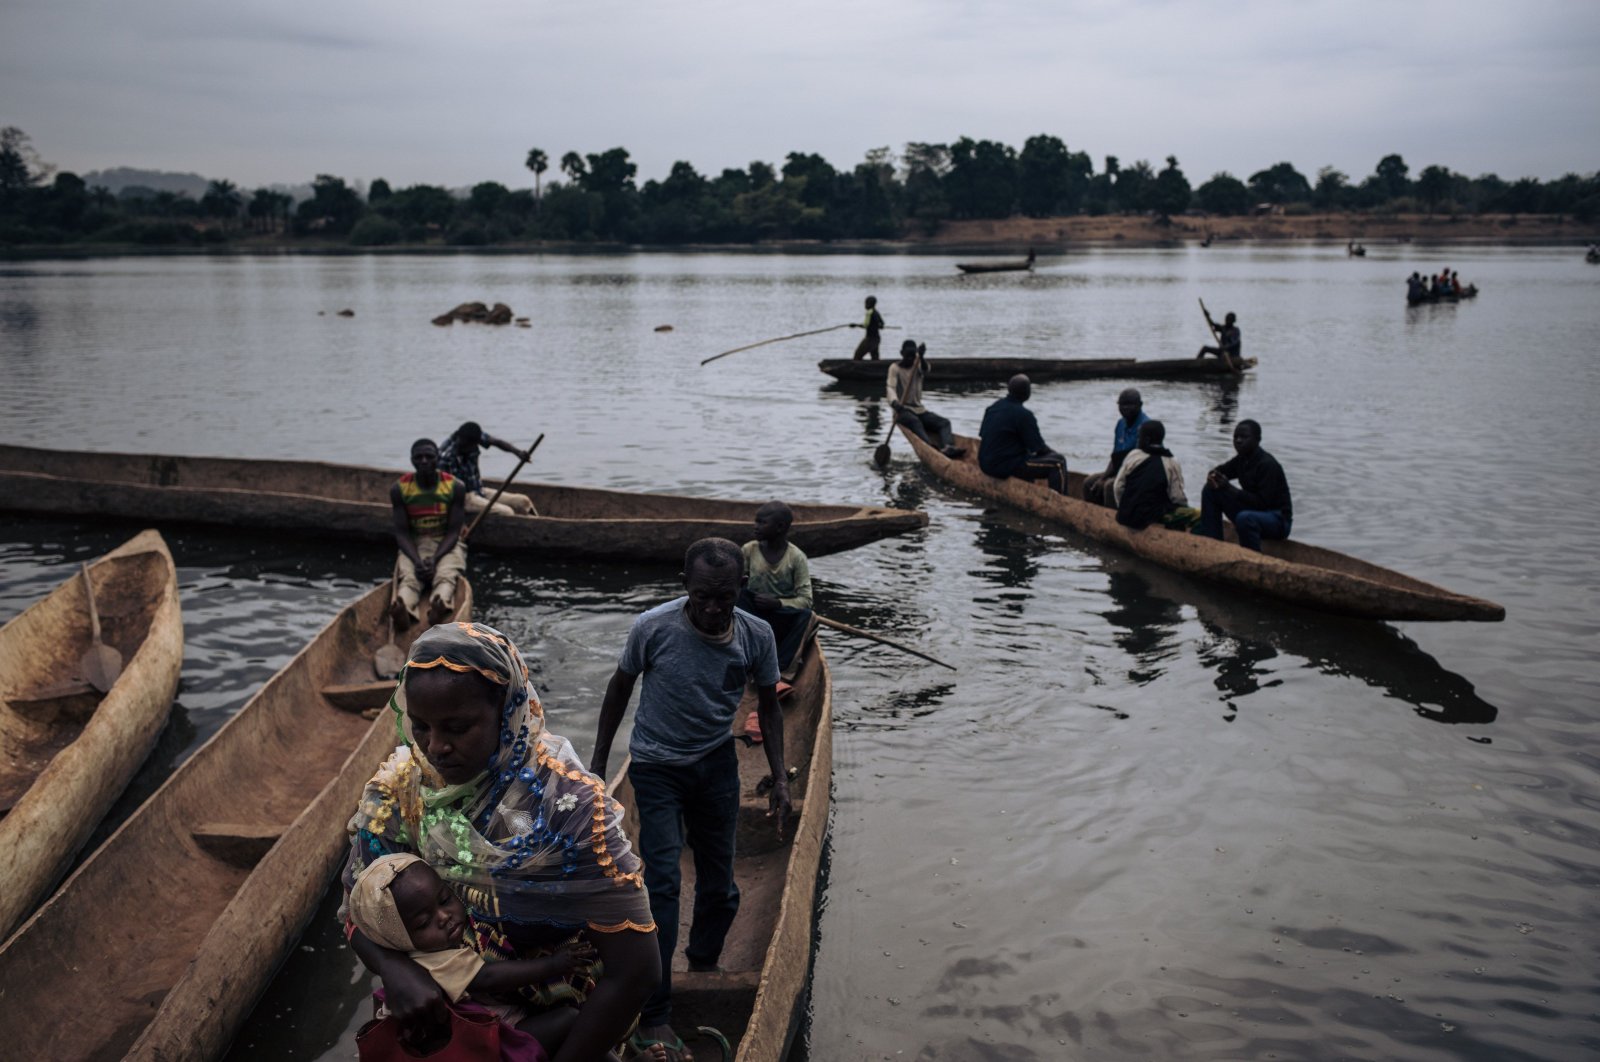 Central African refugees arrive in Ndu after crossing the Mbomou River, which marks the border between the Central African Republic and the Democratic Republic of Congo, on Feb. 5, 2021. (AFP Photo)